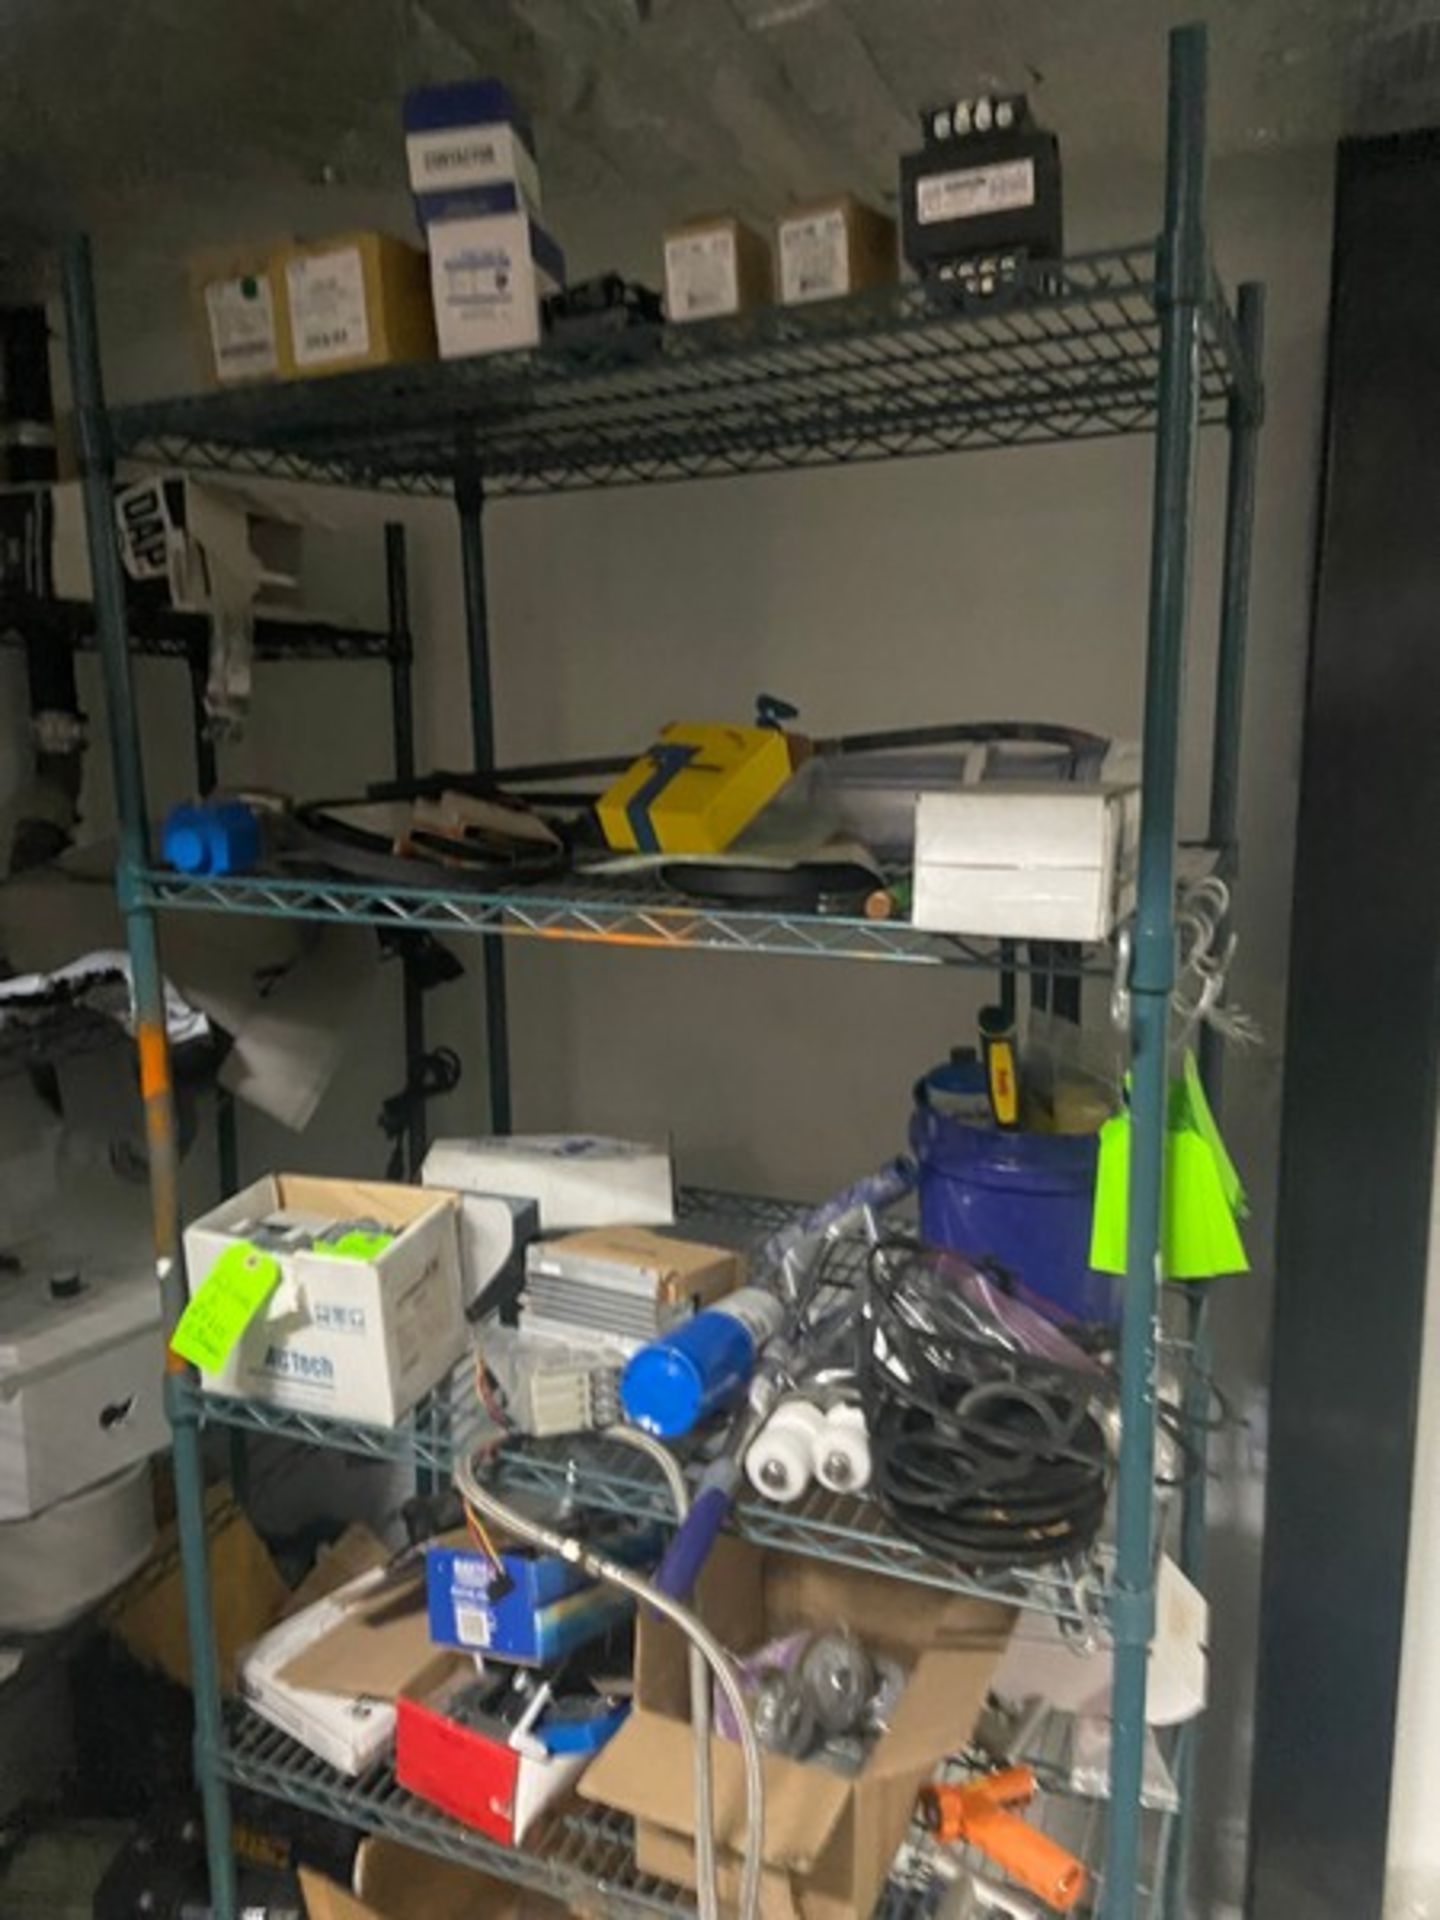 Contents of Back Shelving Area, Includes, Tubing, Electrical Supplies, Scales, Conveyor Parts, - Image 9 of 12